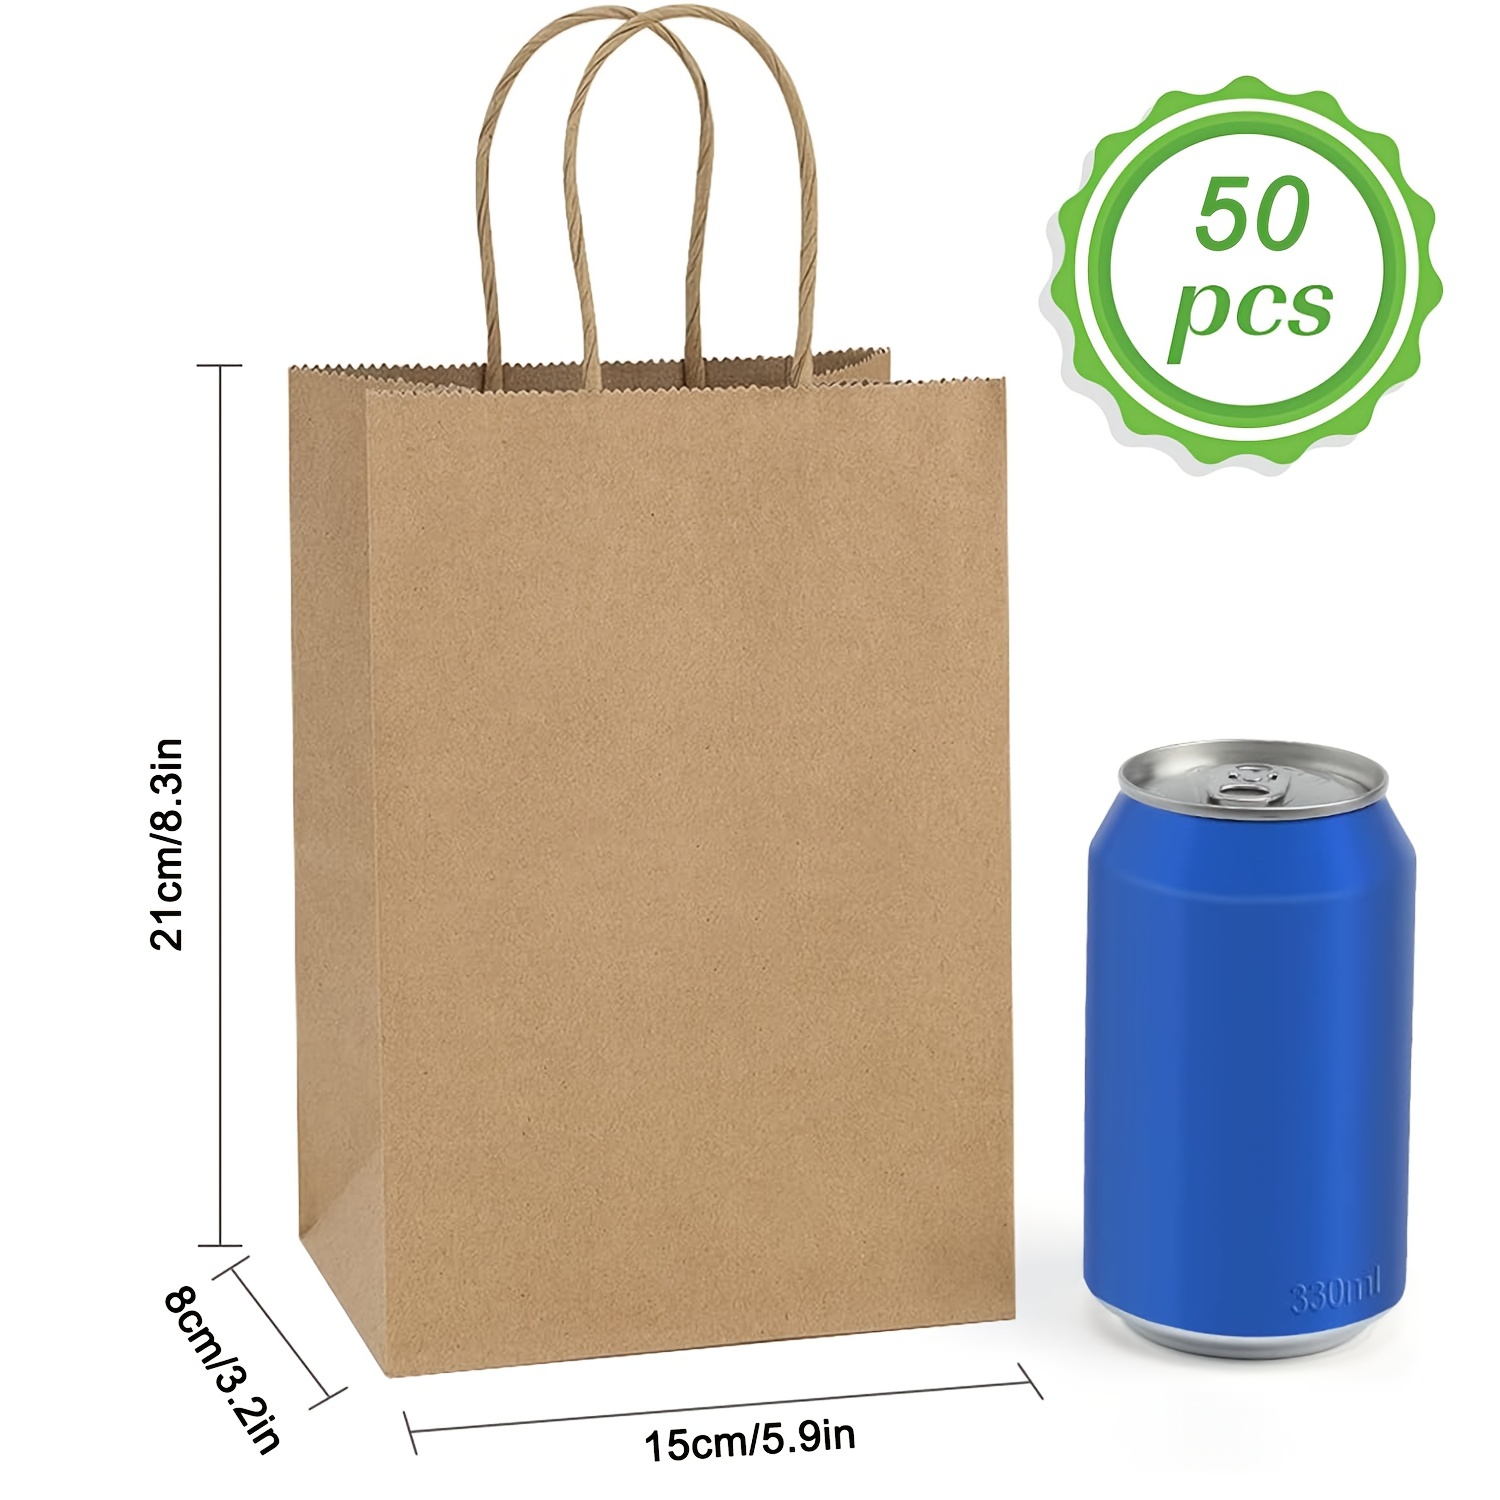 50pcs, Brown Small Plain Natural Paper Gift Bags 15*8*21cm/5.9*3.14*8.26in  With Handles Bulk, Kraft Bags For Birthday Party Favors Grocery Retail Shop